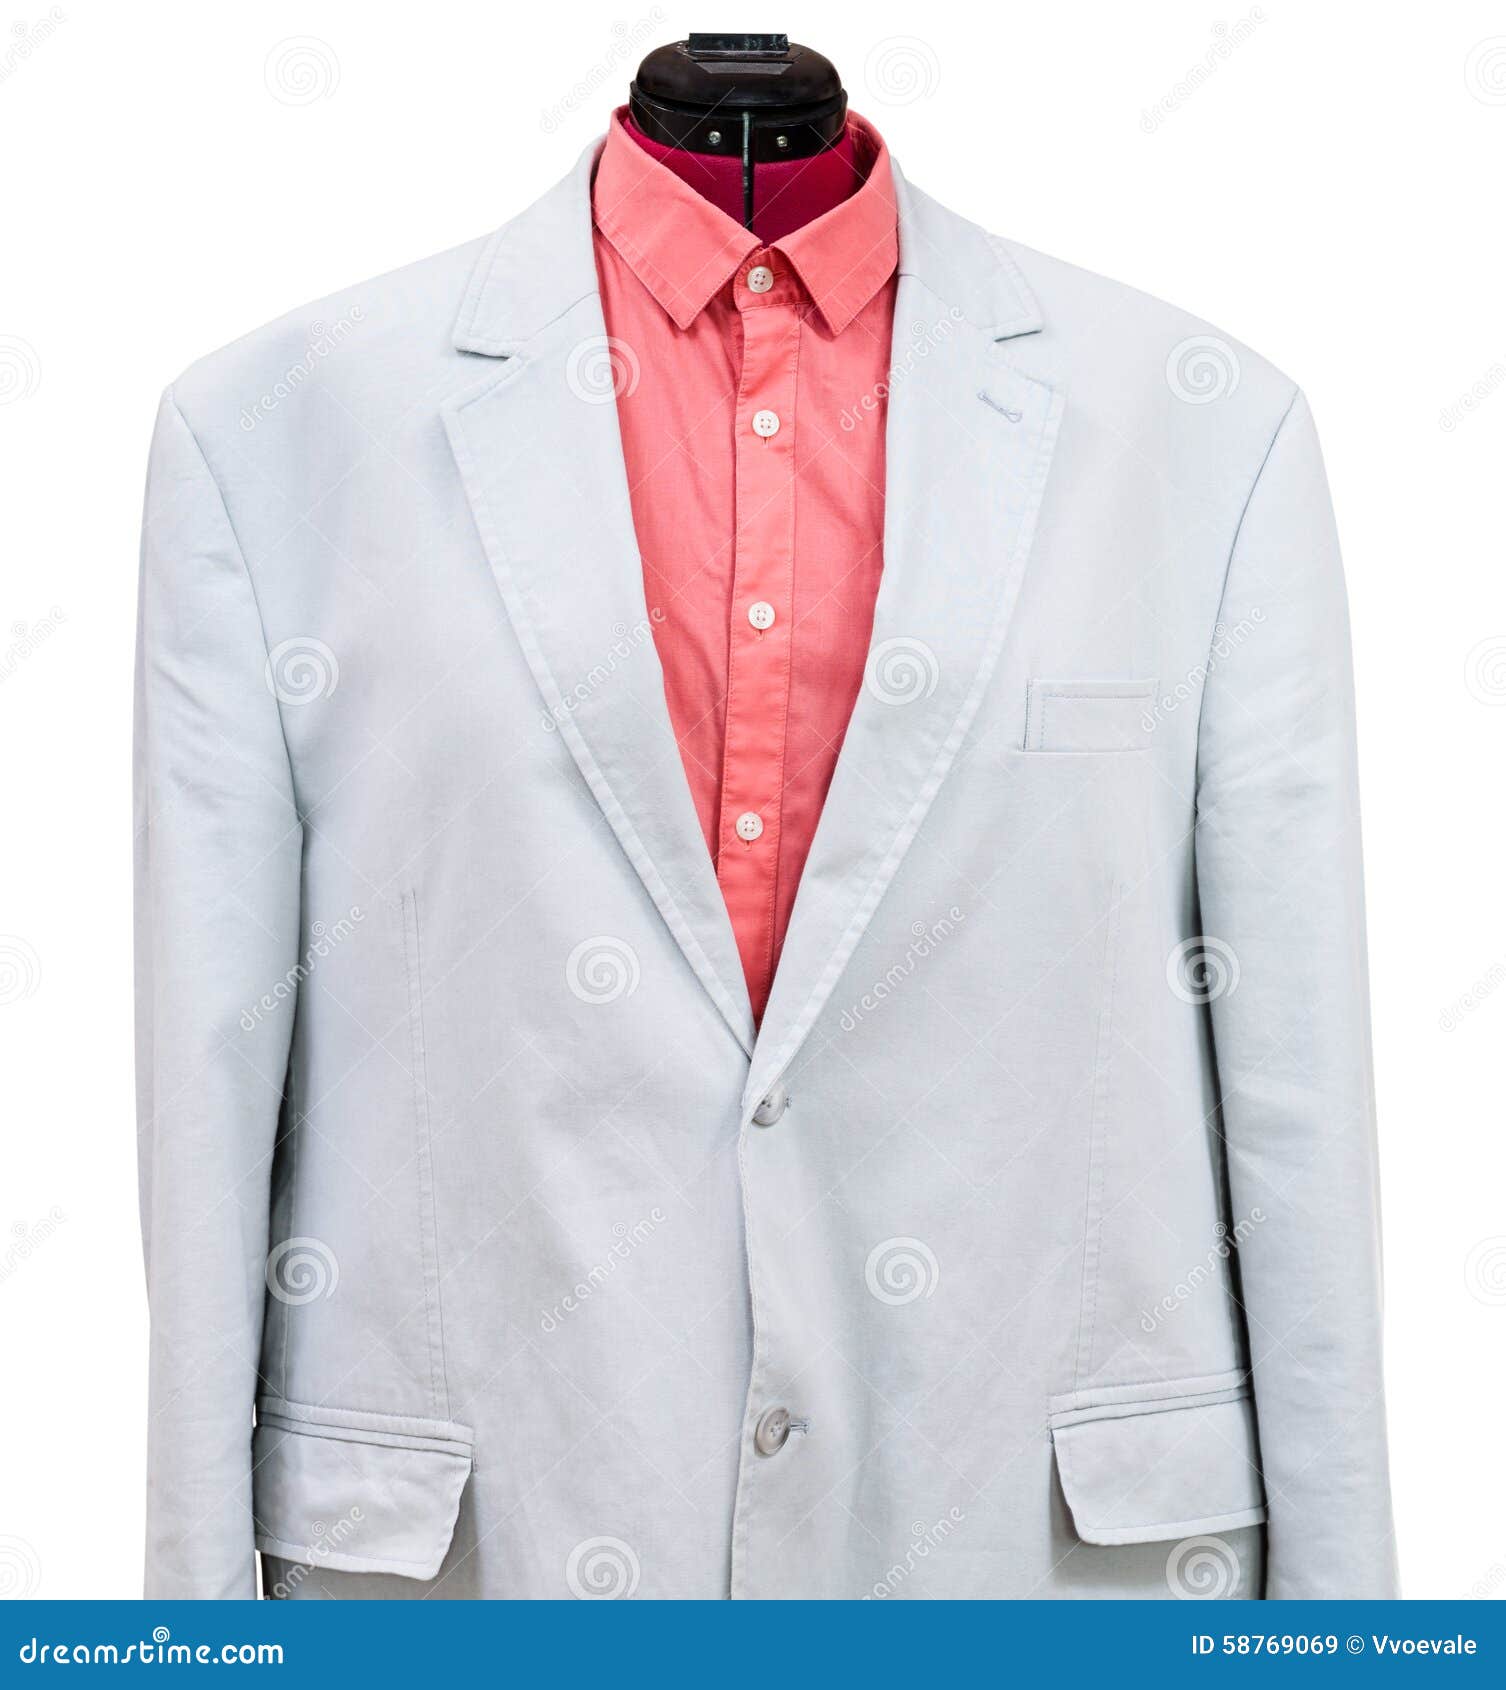 Blue Cotton Jacket with Red Shirt Stock Image - Image of menswear ...